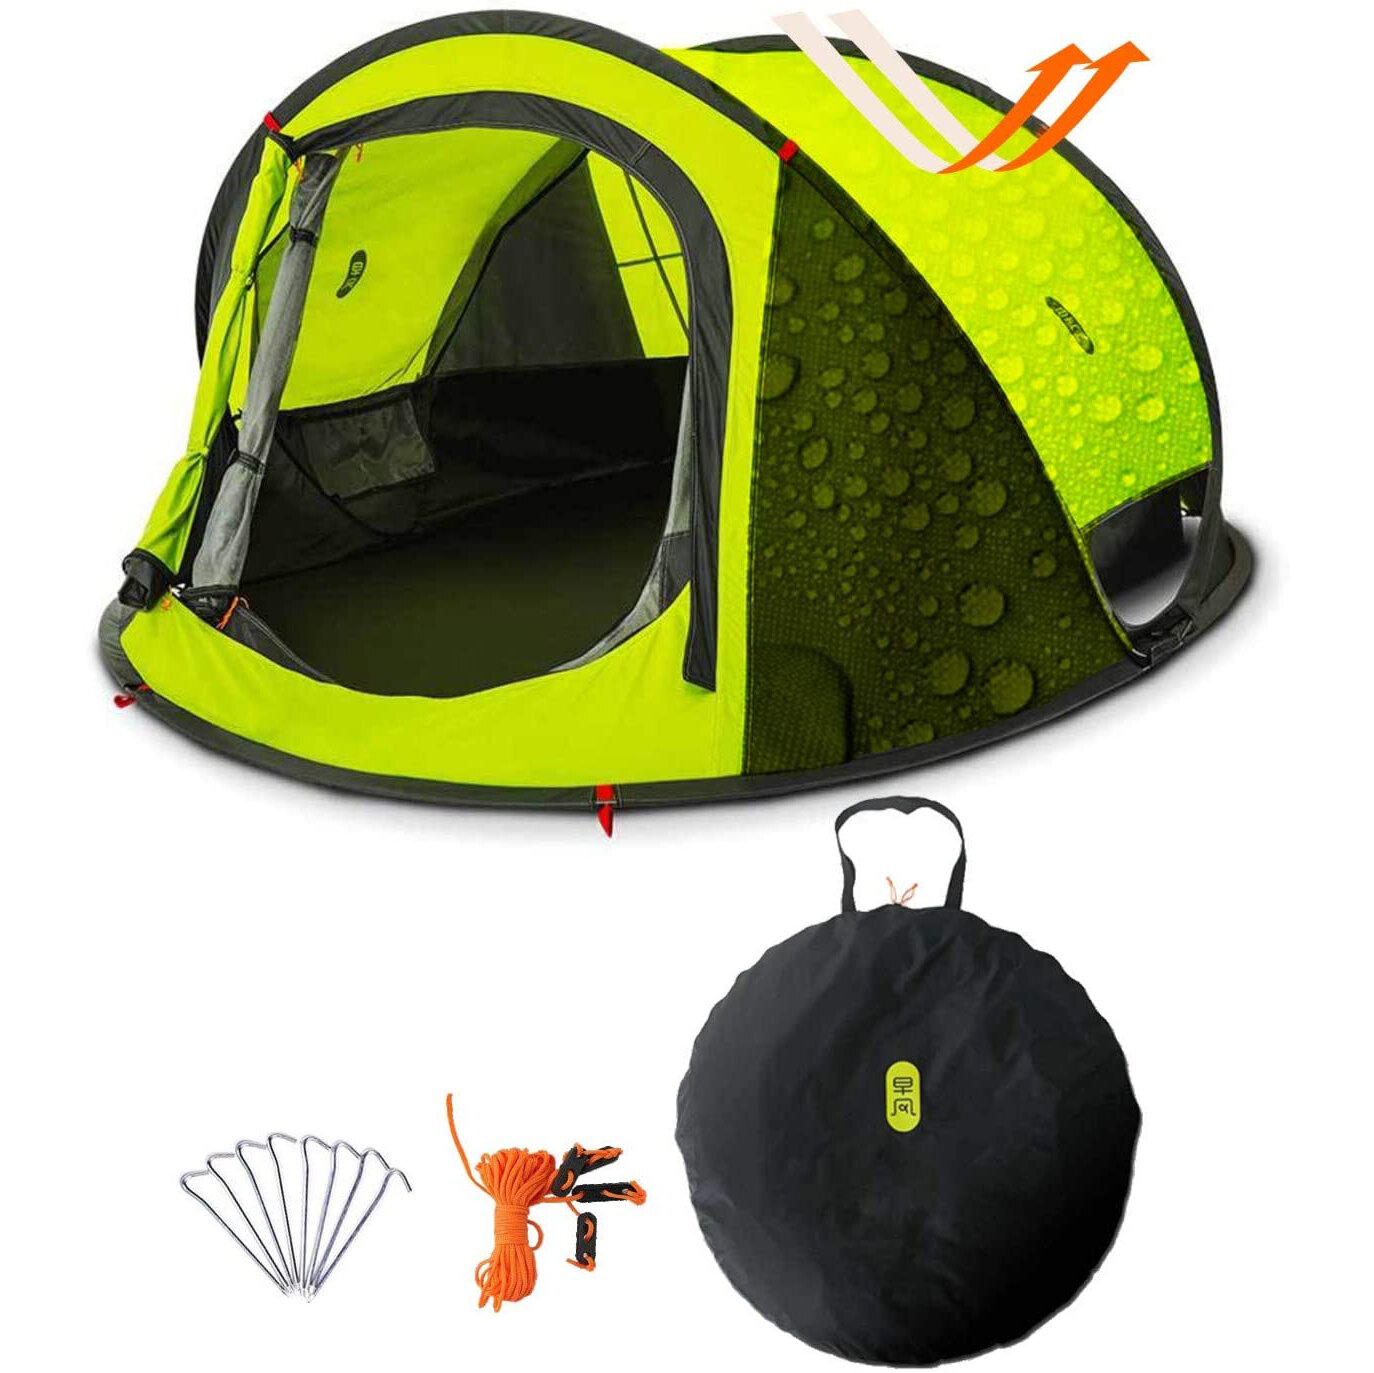 Zenph Double-layer Tent 3-4 People From 3 Seconds Automatic Opening Family Camping Tent Outdoor Waterproof Sun Shelter